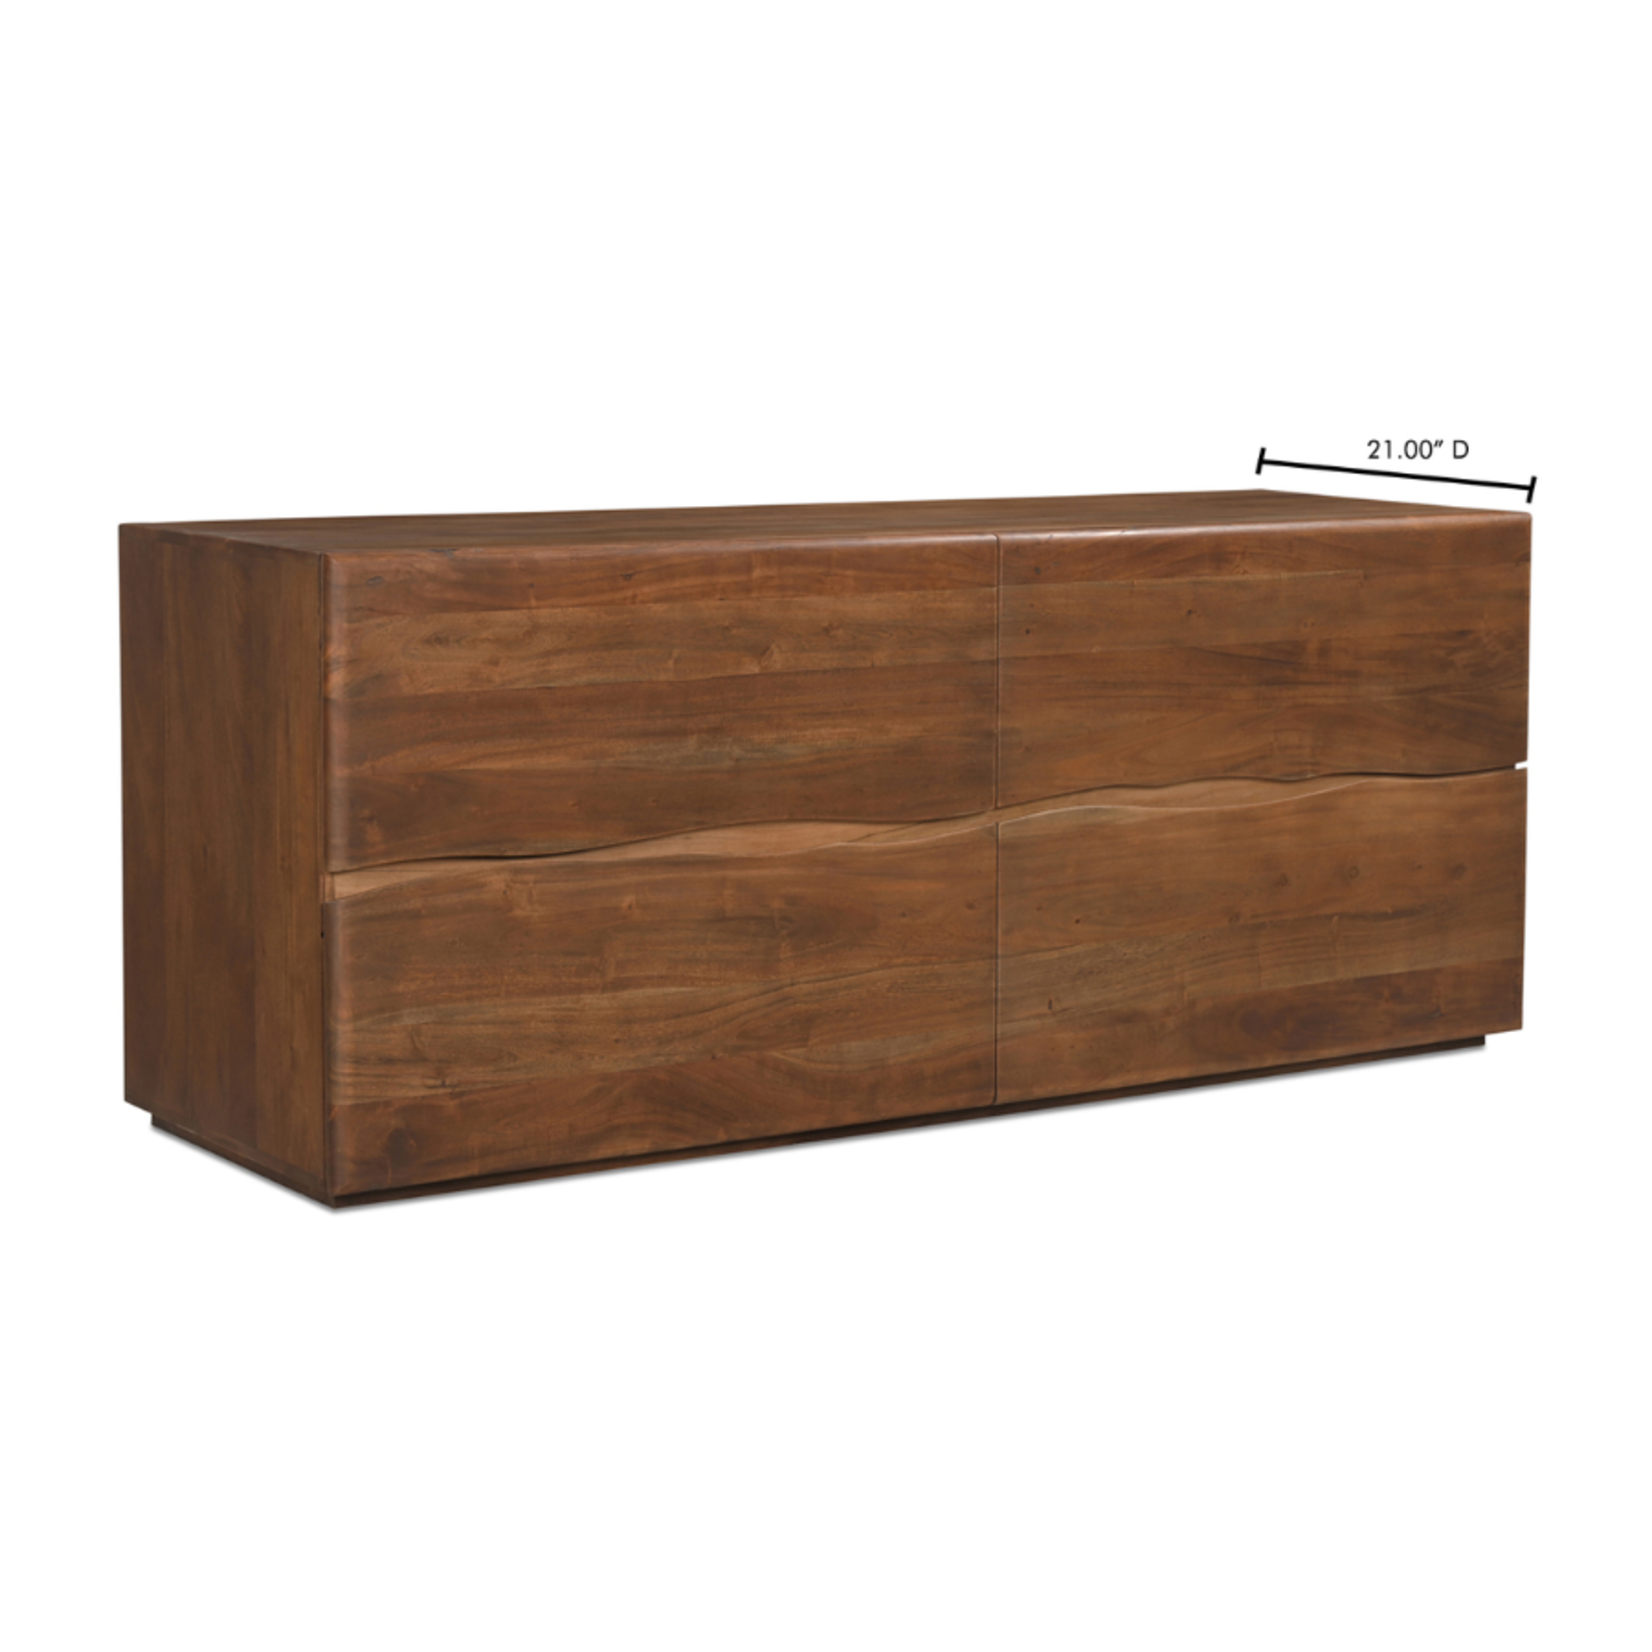 MOES HOME COLLECTION SWANSAN 4 DRAWER DRESSER